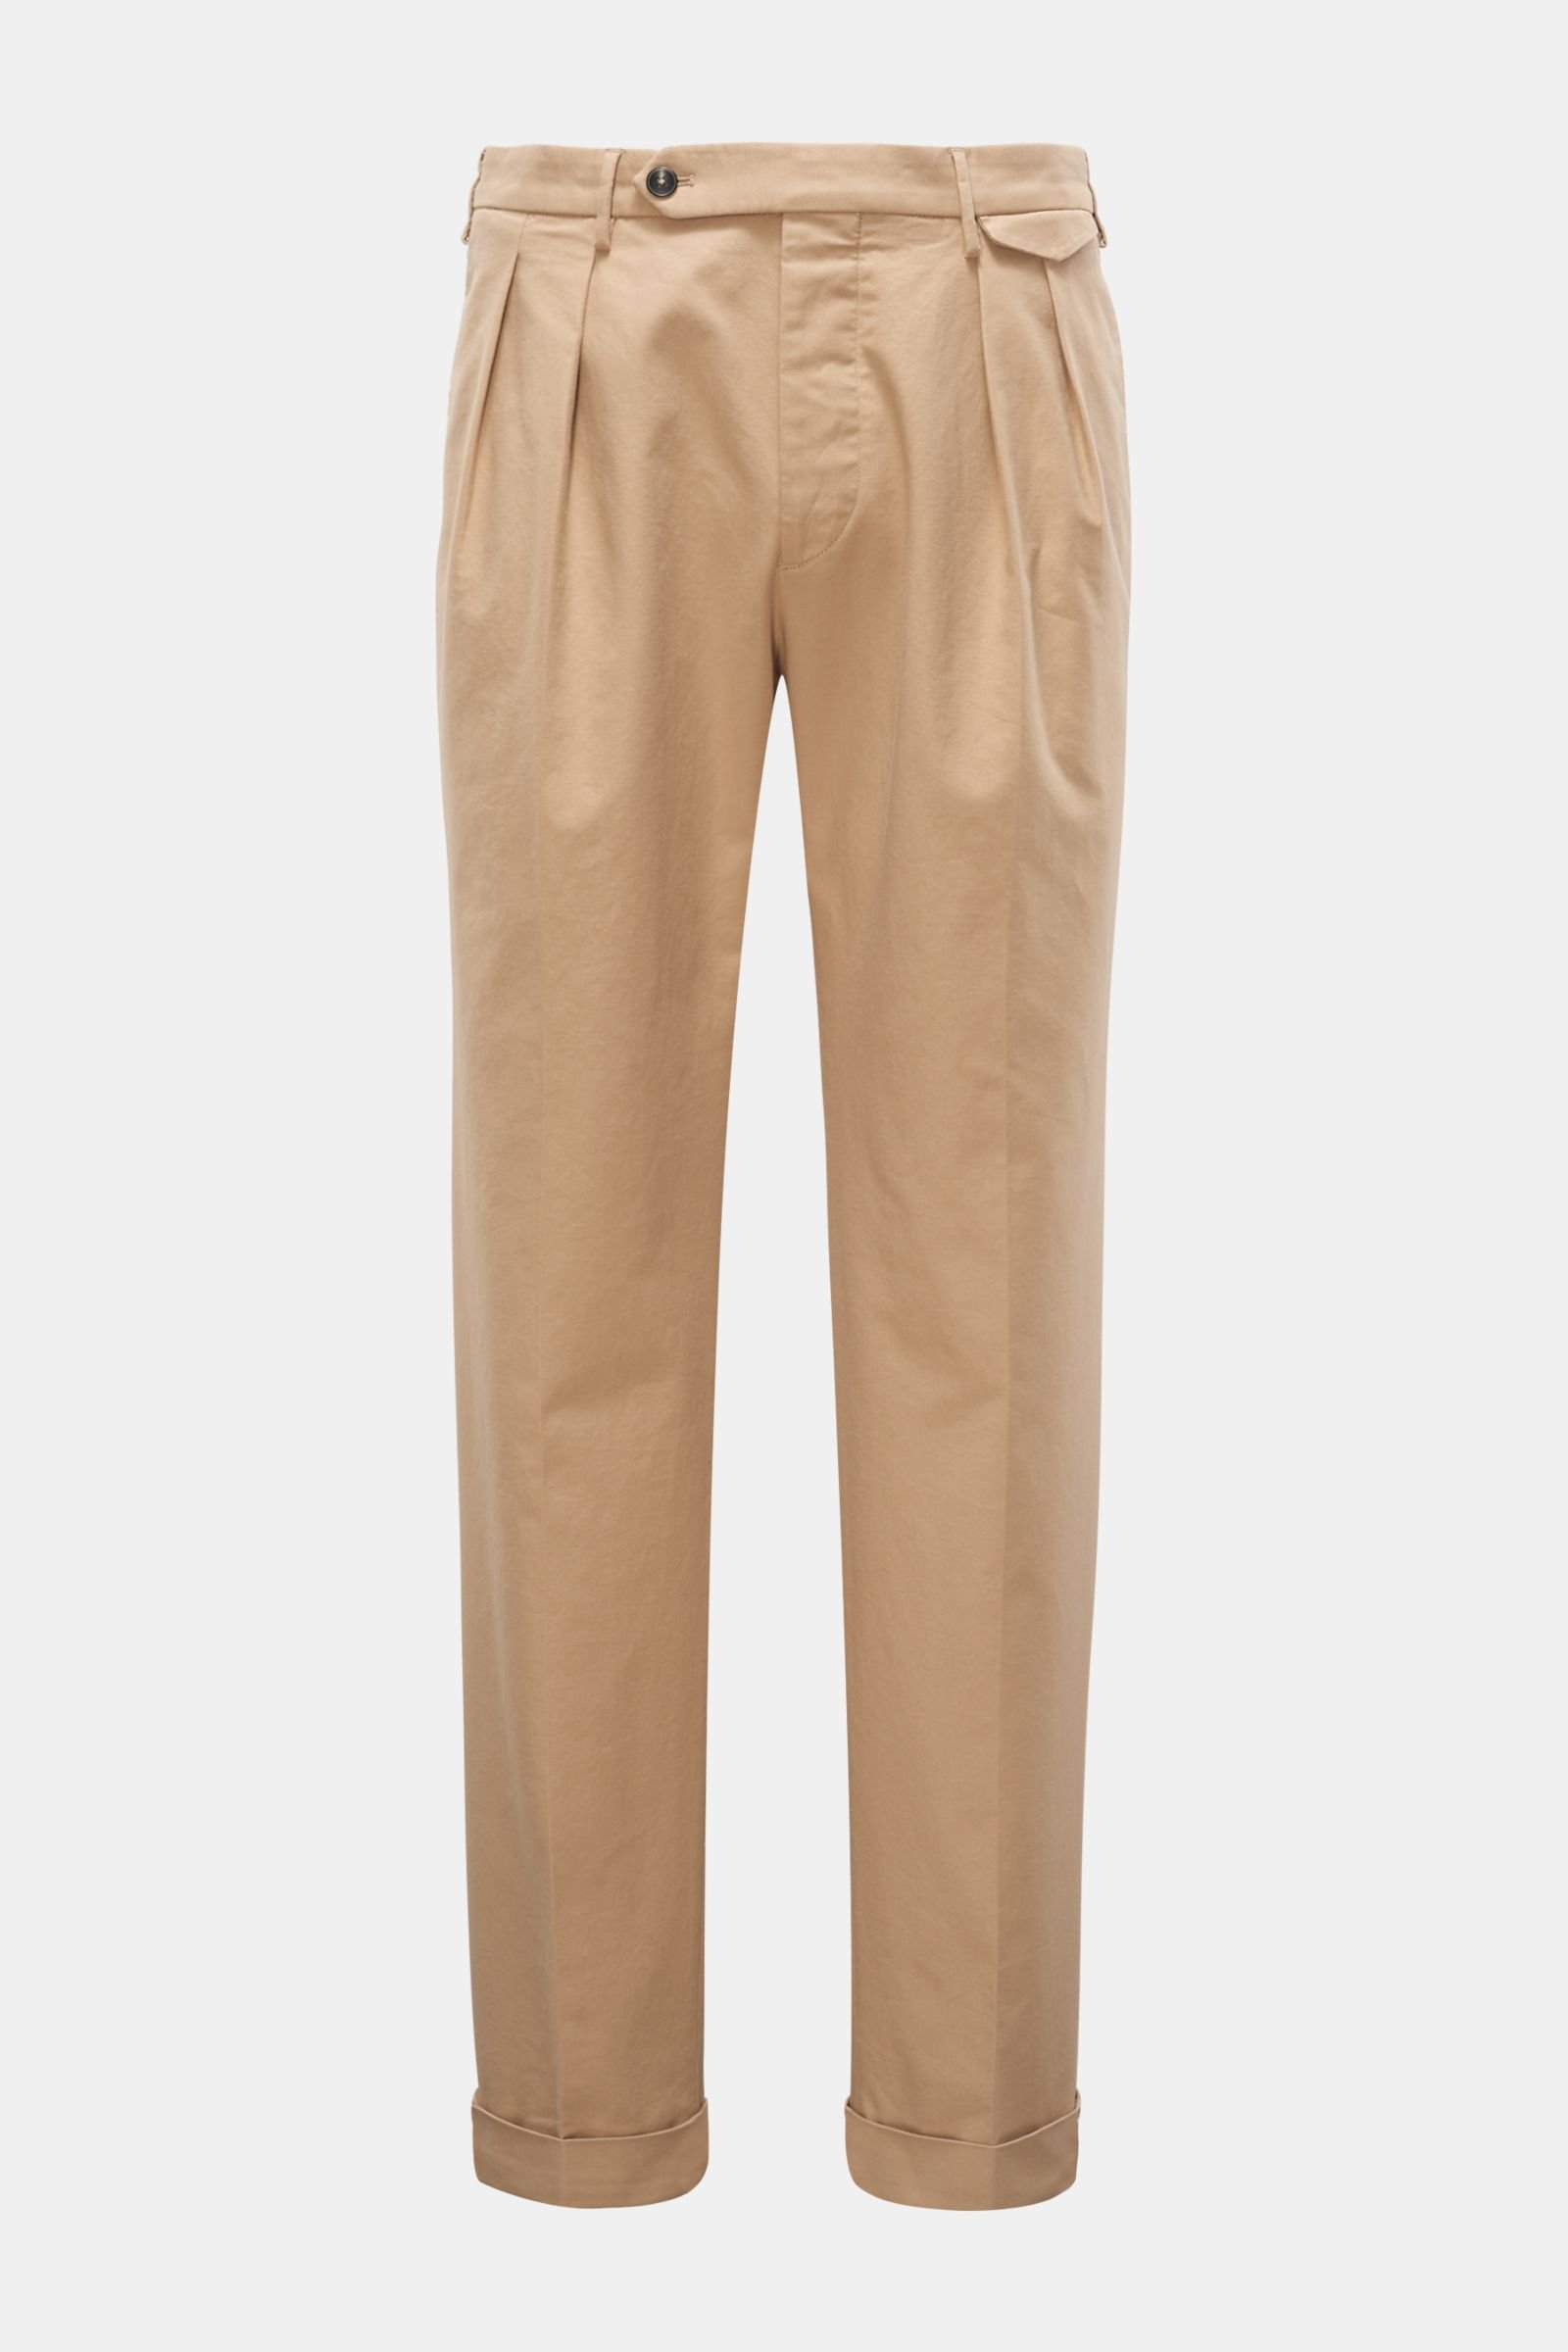 Cotton trousers 'High Comfort' light brown